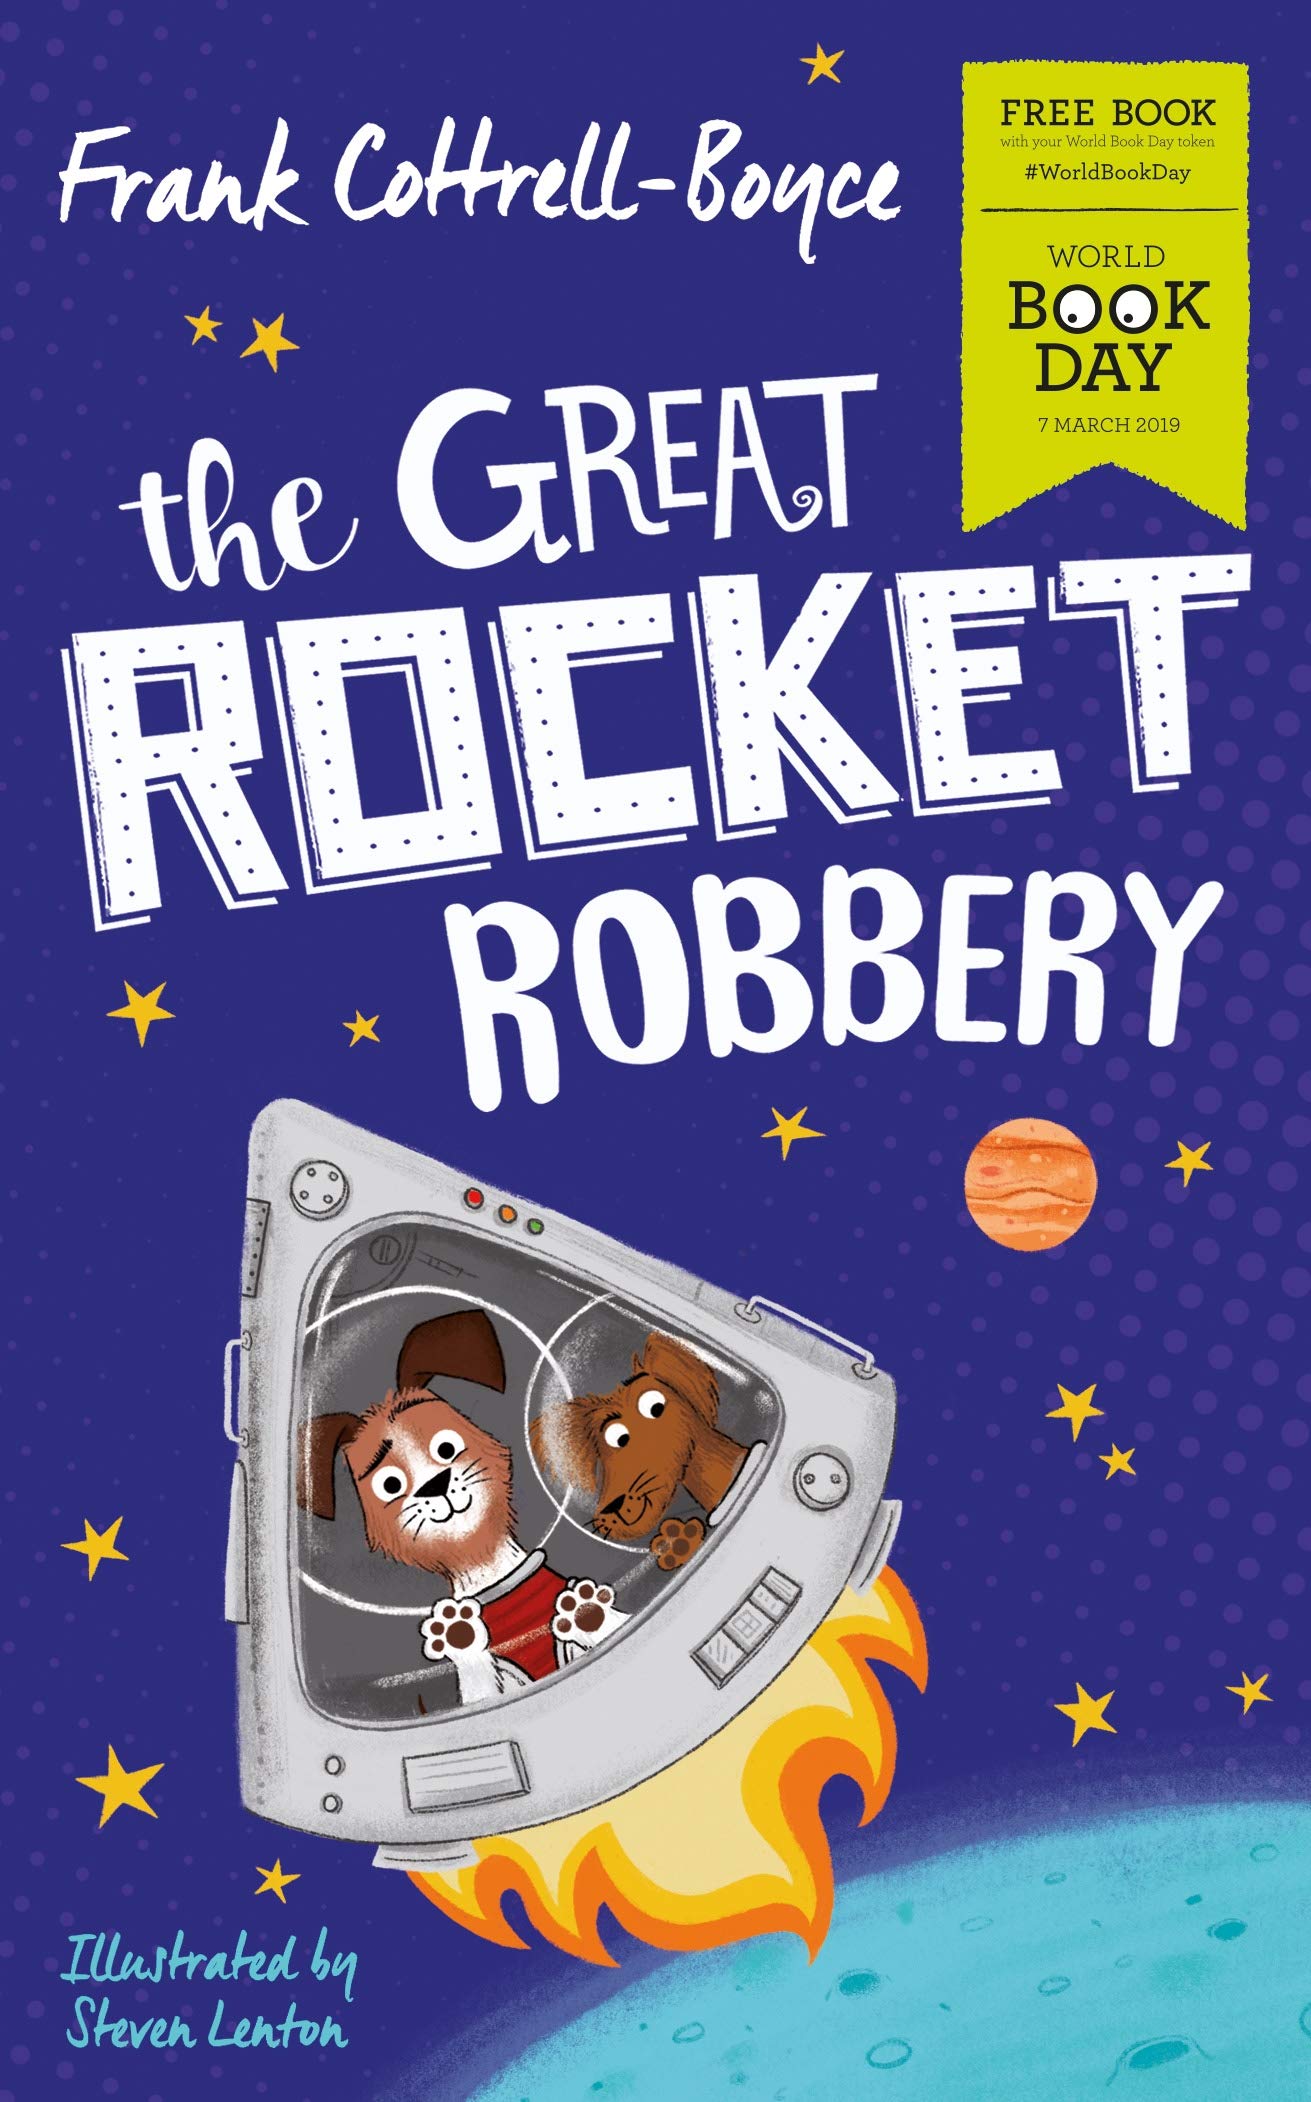 The Great rocket robbery